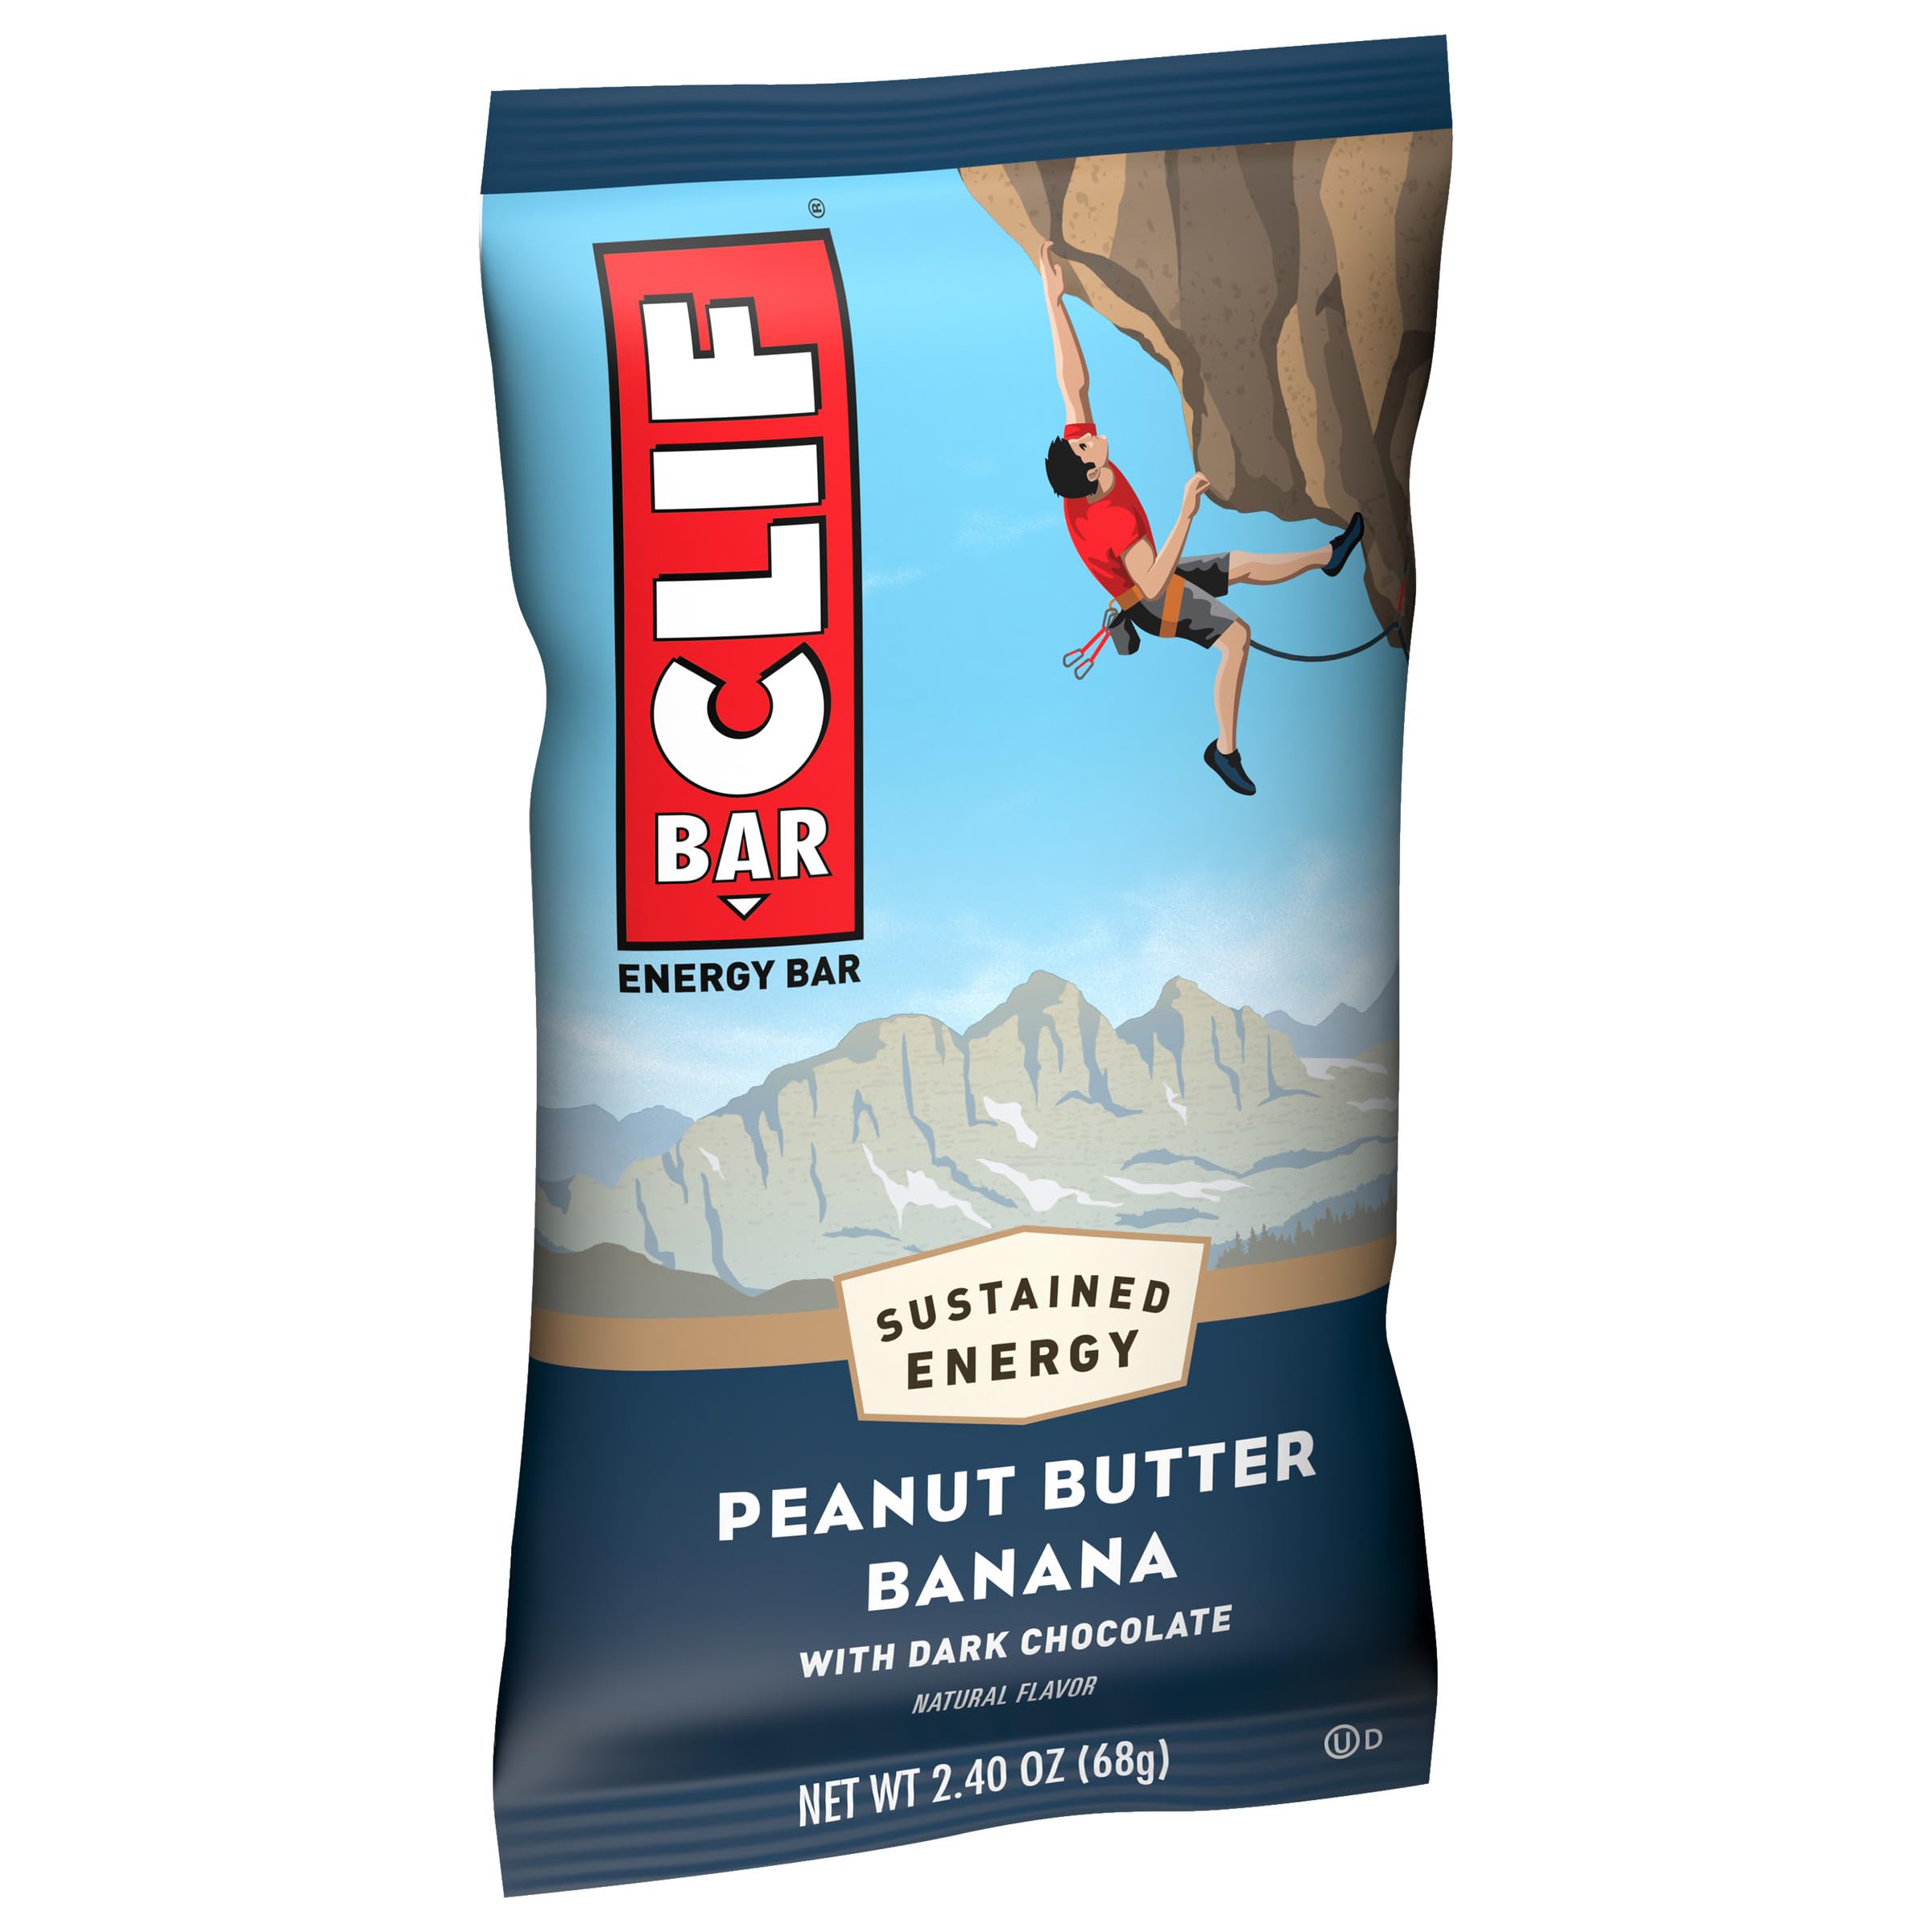 CLIF BAR - Peanut Butter Banana with Dark Chocolate Flavor - Made with Organic Oats - Non-GMO - Plant Based - Energy Bars - 2.4 oz.